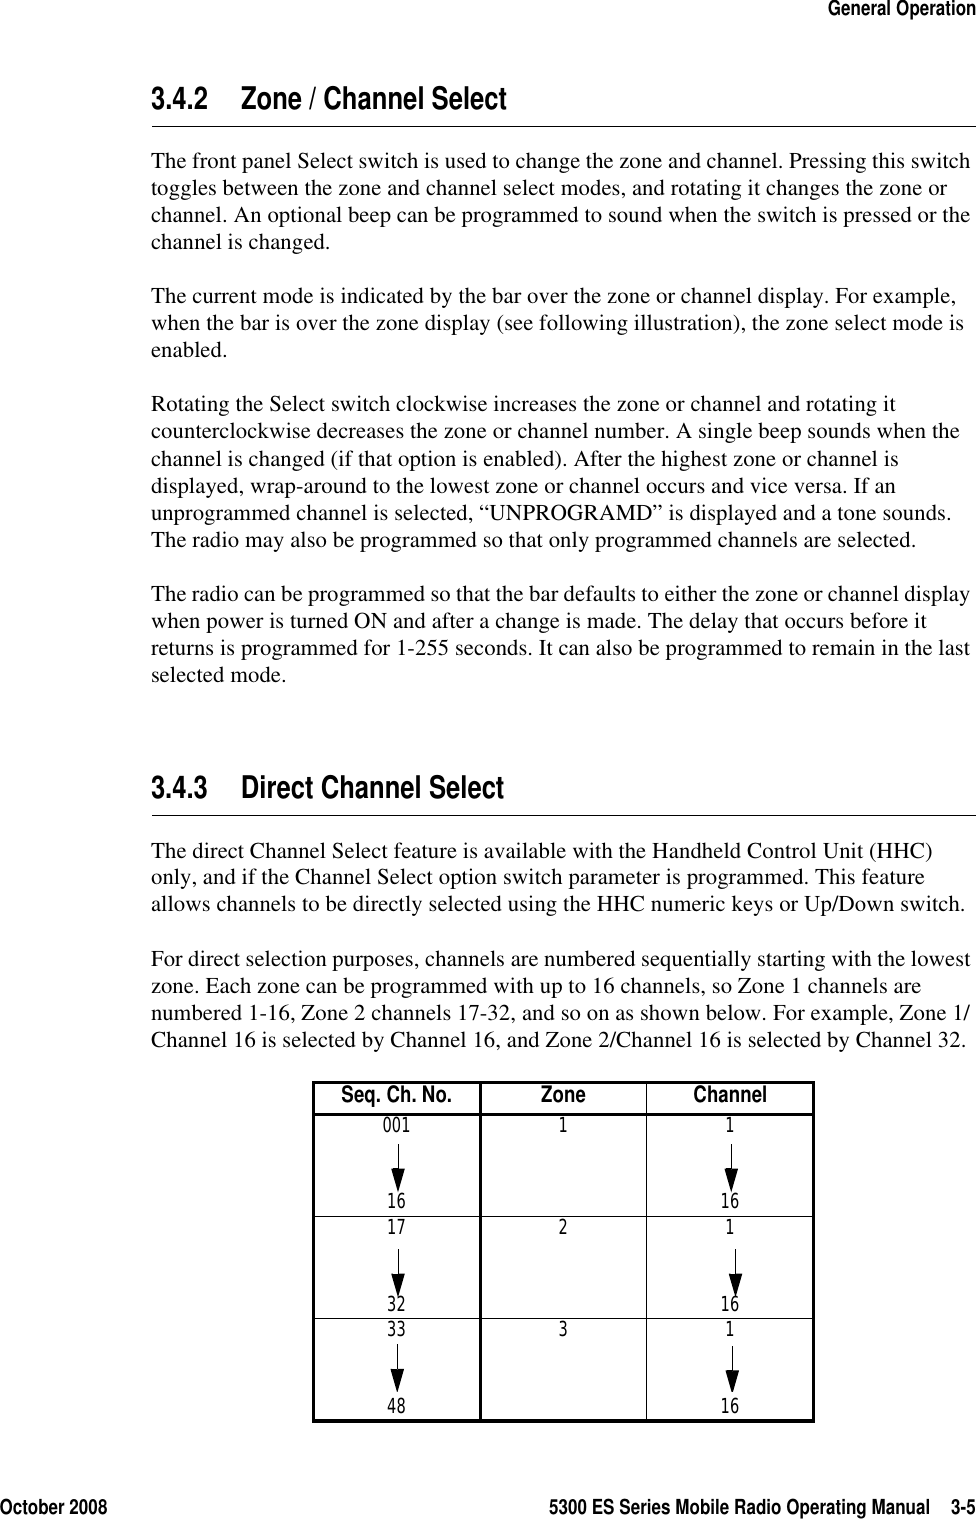 October 2008 5300 ES Series Mobile Radio Operating Manual 3-5General Operation3.4.2 Zone / Channel Select The front panel Select switch is used to change the zone and channel. Pressing this switch toggles between the zone and channel select modes, and rotating it changes the zone or channel. An optional beep can be programmed to sound when the switch is pressed or the channel is changed.The current mode is indicated by the bar over the zone or channel display. For example, when the bar is over the zone display (see following illustration), the zone select mode is enabled.Rotating the Select switch clockwise increases the zone or channel and rotating it counterclockwise decreases the zone or channel number. A single beep sounds when the channel is changed (if that option is enabled). After the highest zone or channel is displayed, wrap-around to the lowest zone or channel occurs and vice versa. If an unprogrammed channel is selected, “UNPROGRAMD” is displayed and a tone sounds. The radio may also be programmed so that only programmed channels are selected.The radio can be programmed so that the bar defaults to either the zone or channel display when power is turned ON and after a change is made. The delay that occurs before it returns is programmed for 1-255 seconds. It can also be programmed to remain in the last selected mode.3.4.3 Direct Channel SelectThe direct Channel Select feature is available with the Handheld Control Unit (HHC) only, and if the Channel Select option switch parameter is programmed. This feature allows channels to be directly selected using the HHC numeric keys or Up/Down switch. For direct selection purposes, channels are numbered sequentially starting with the lowest zone. Each zone can be programmed with up to 16 channels, so Zone 1 channels are numbered 1-16, Zone 2 channels 17-32, and so on as shown below. For example, Zone 1/Channel 16 is selected by Channel 16, and Zone 2/Channel 16 is selected by Channel 32.Seq. Ch. No. Zone Channel001 1 116 1617 2 132 1633 3 148 16